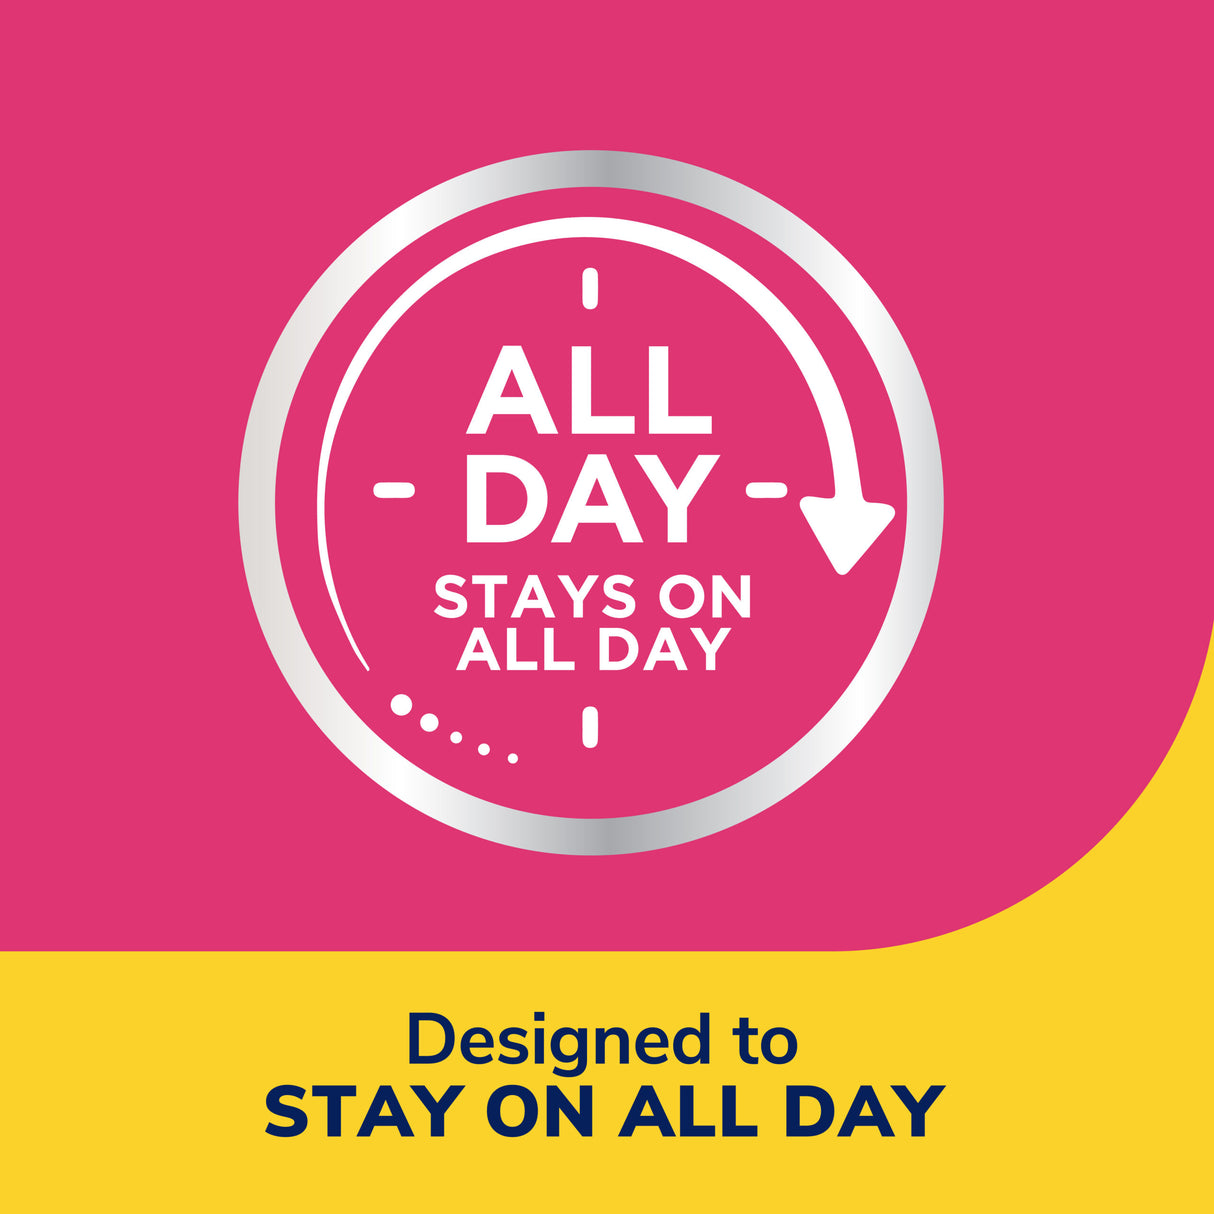 image of all day stays on all day